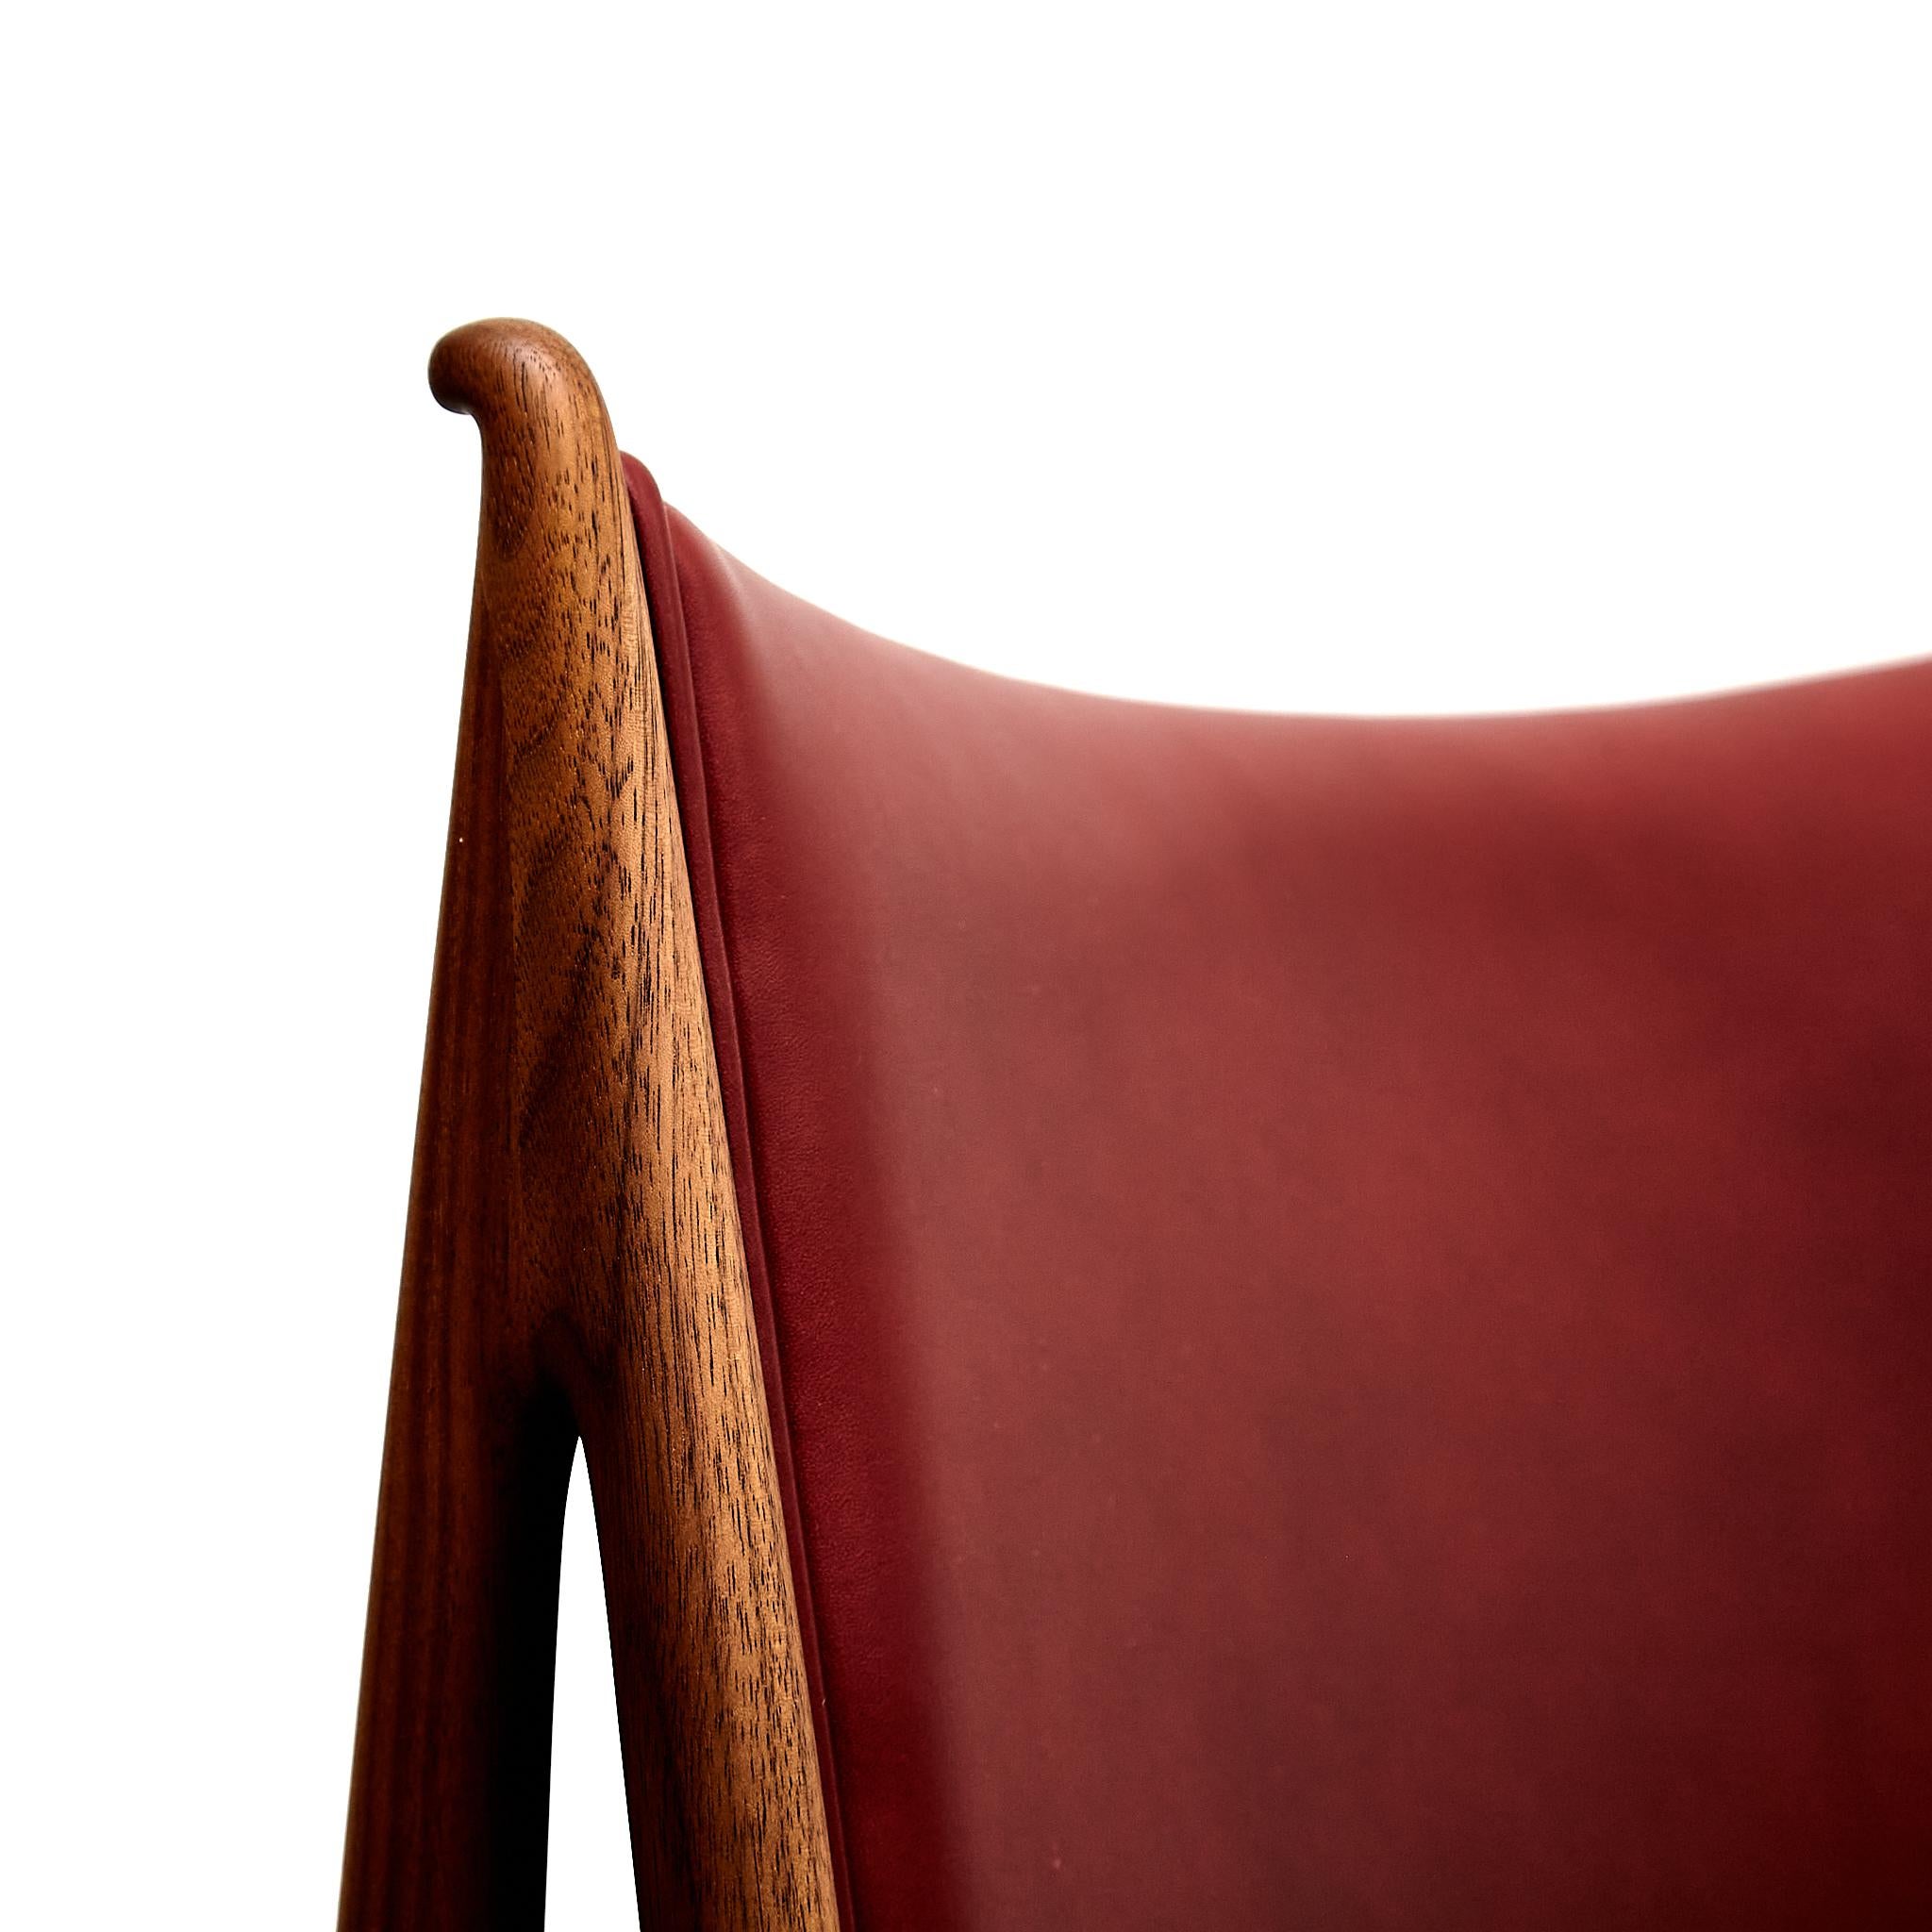 Finn Juhl Egyptian Chair in Walnut Wood and Dark Red Leather For Sale 9